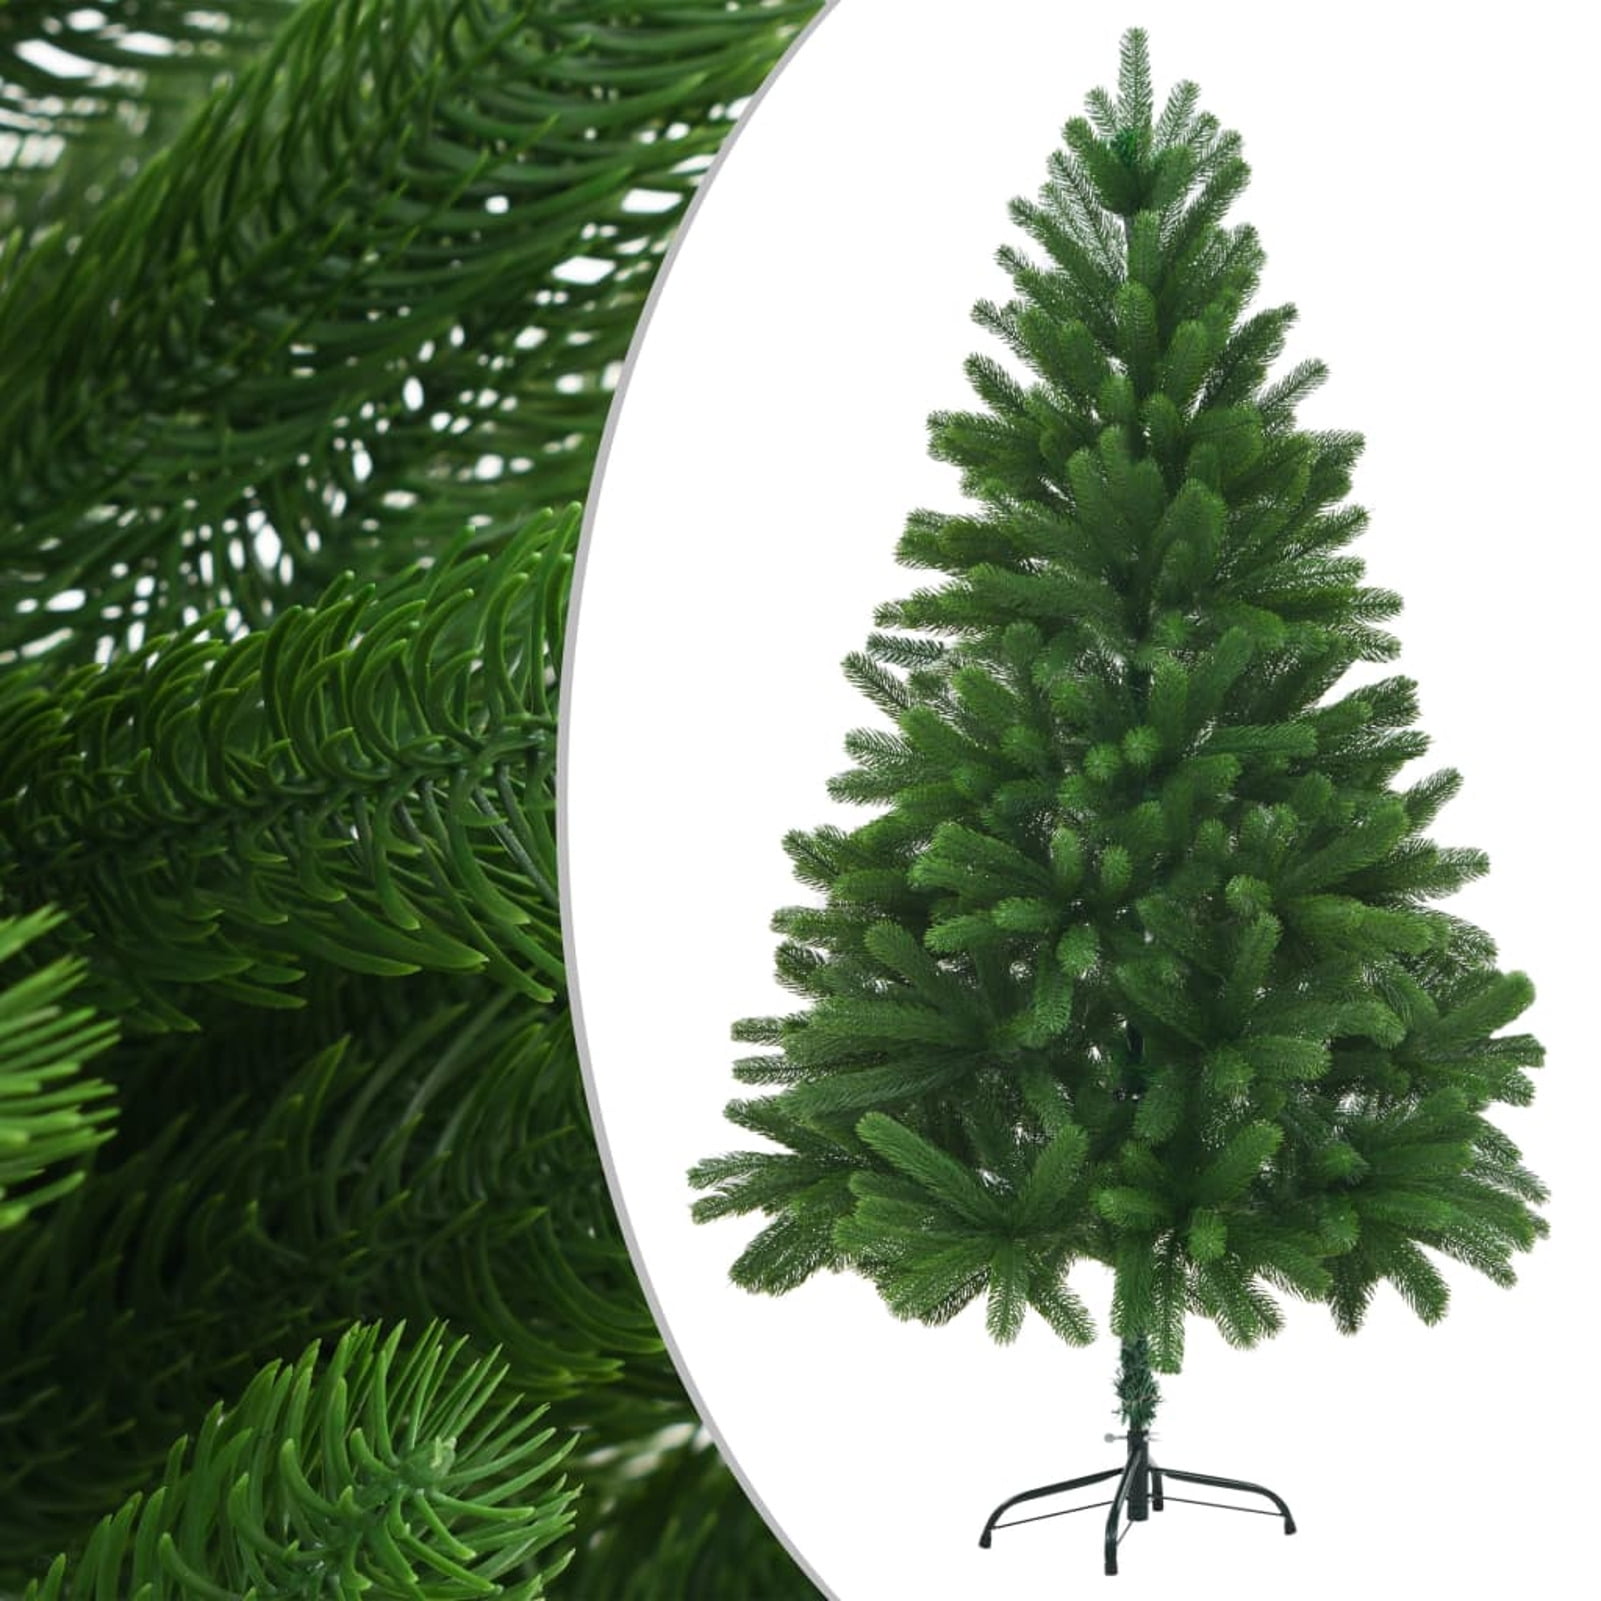 Details about   5/6/7Ft Green Artificial Spruce Christmas Tree w/ Metal Stand Xmas Village Decor 